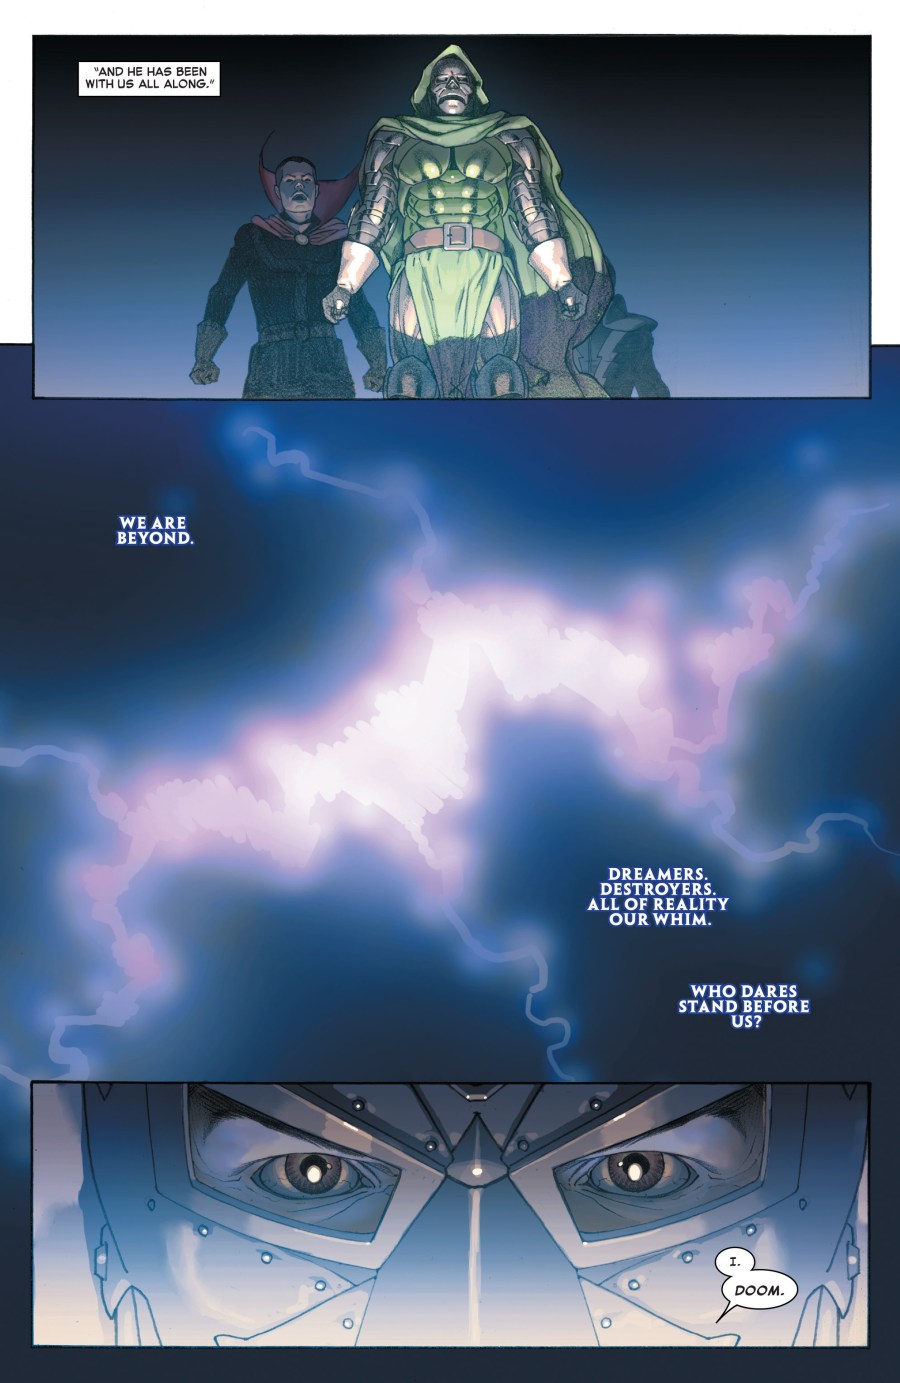 Dr. Doom defies the Beyonders in Secret Wars Vol. 1 #1 "The End Times" (2015), Marvel Comics. Words by Jonathan Hickman, art by Esad Ribić, Ive Svorcina, and Chris Eliopoulos.